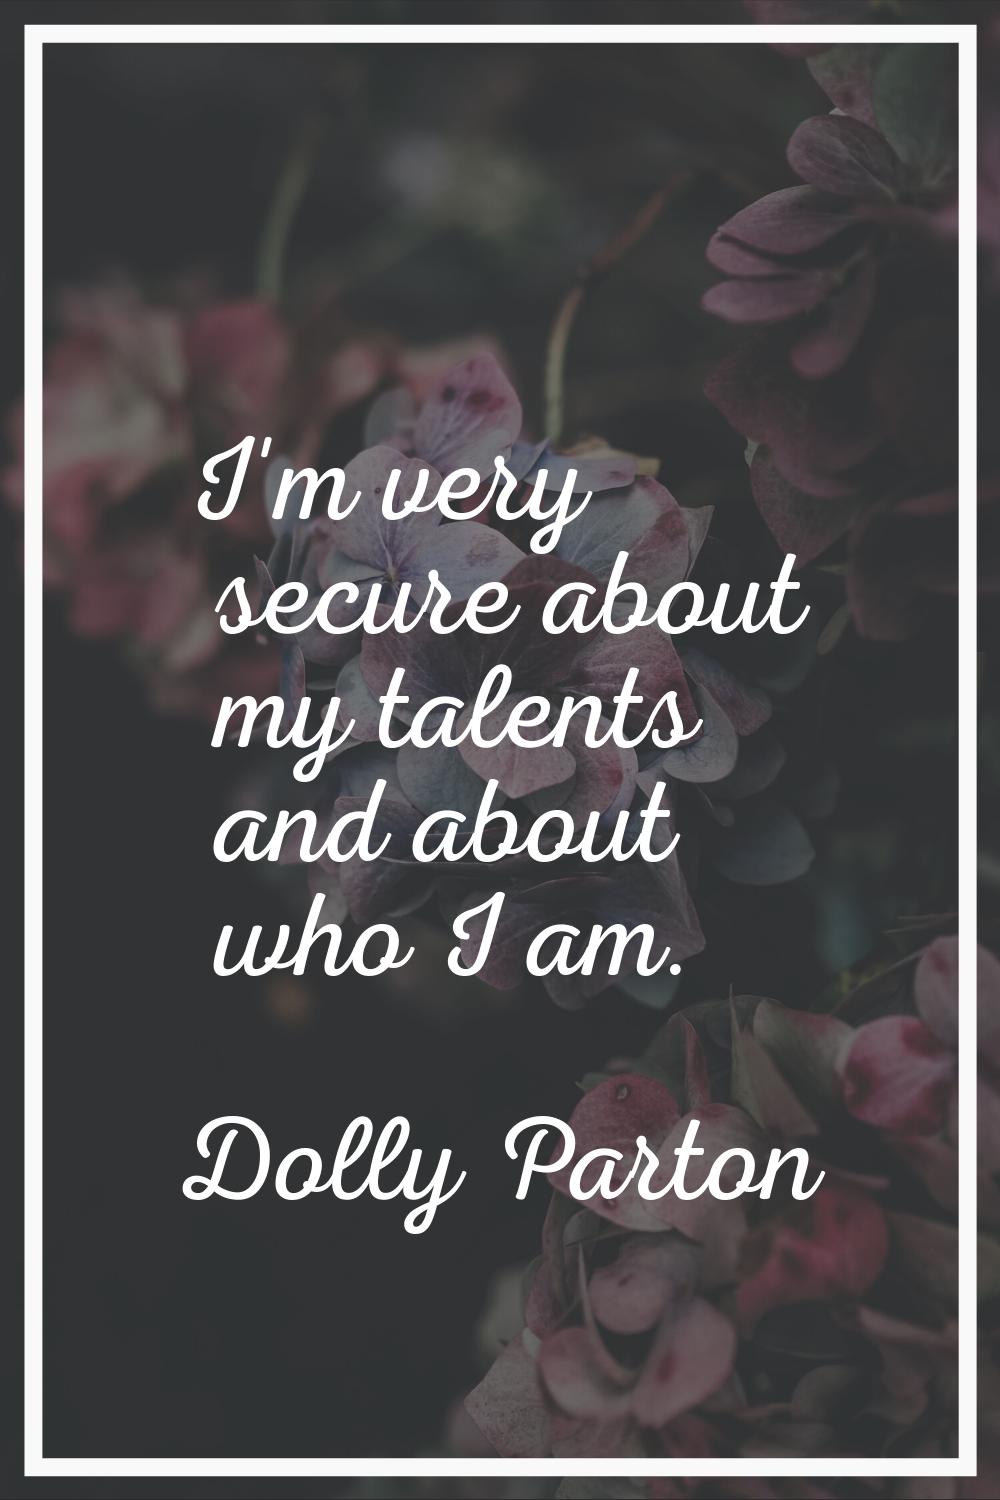 I'm very secure about my talents and about who I am.